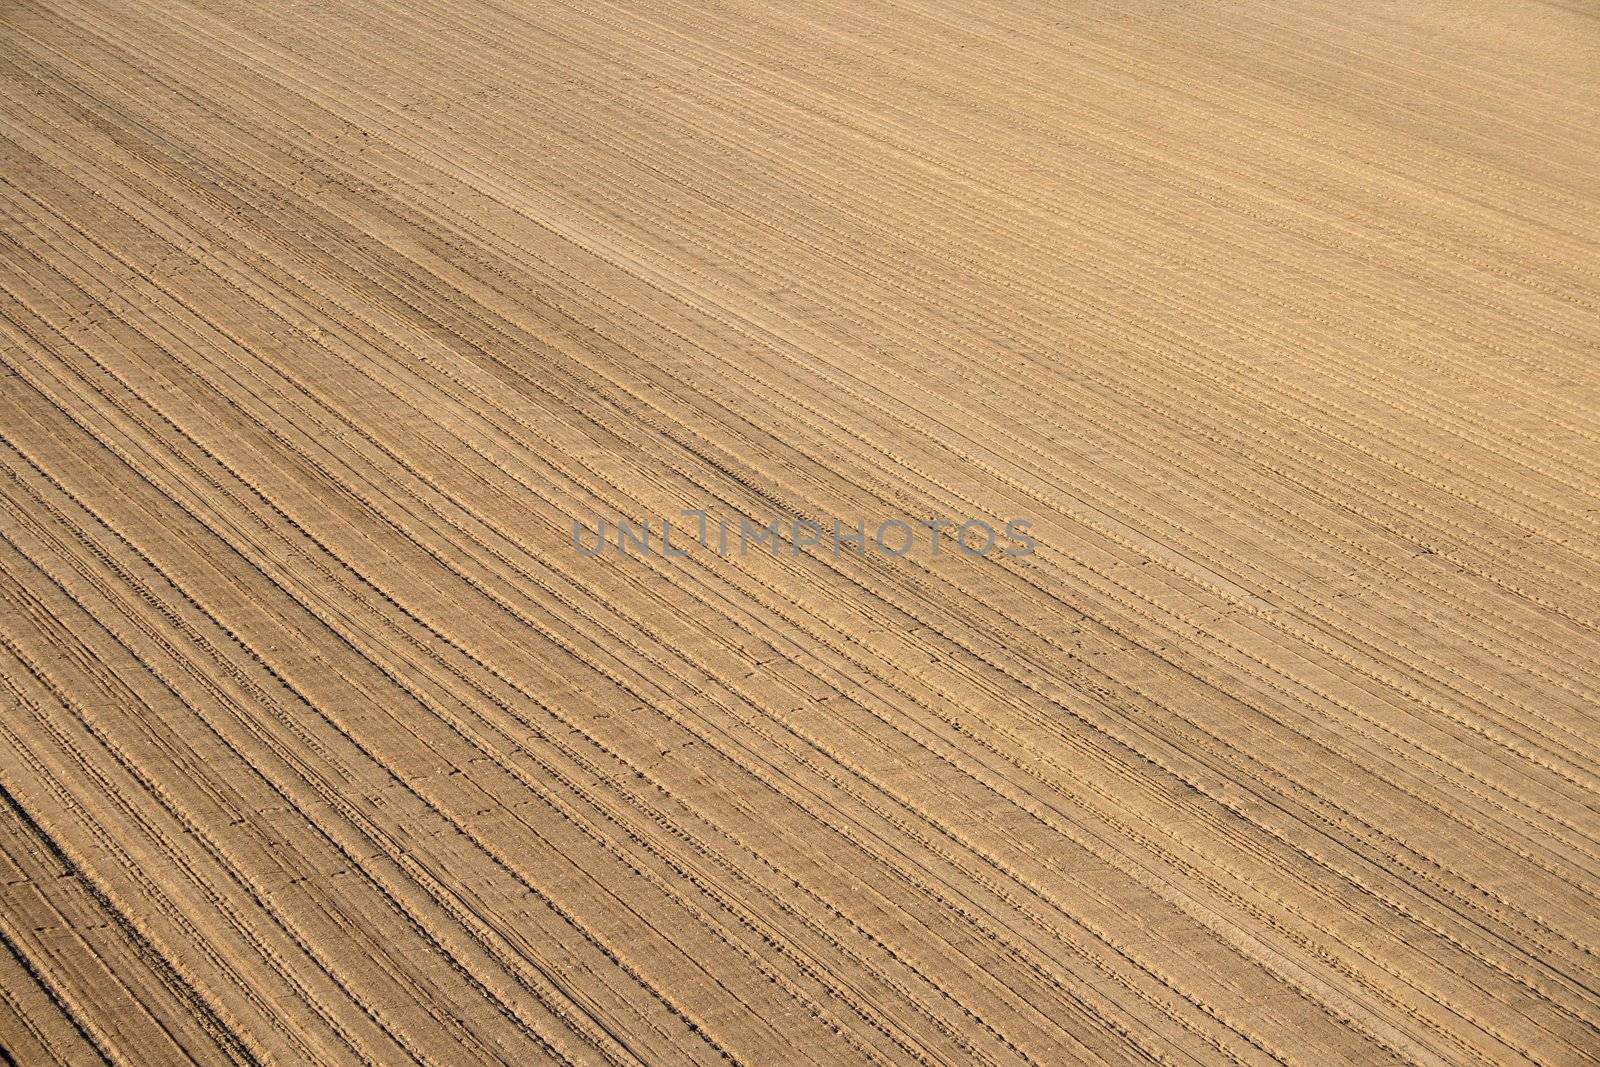 Soil background. Ploughed land ready for cultivation.